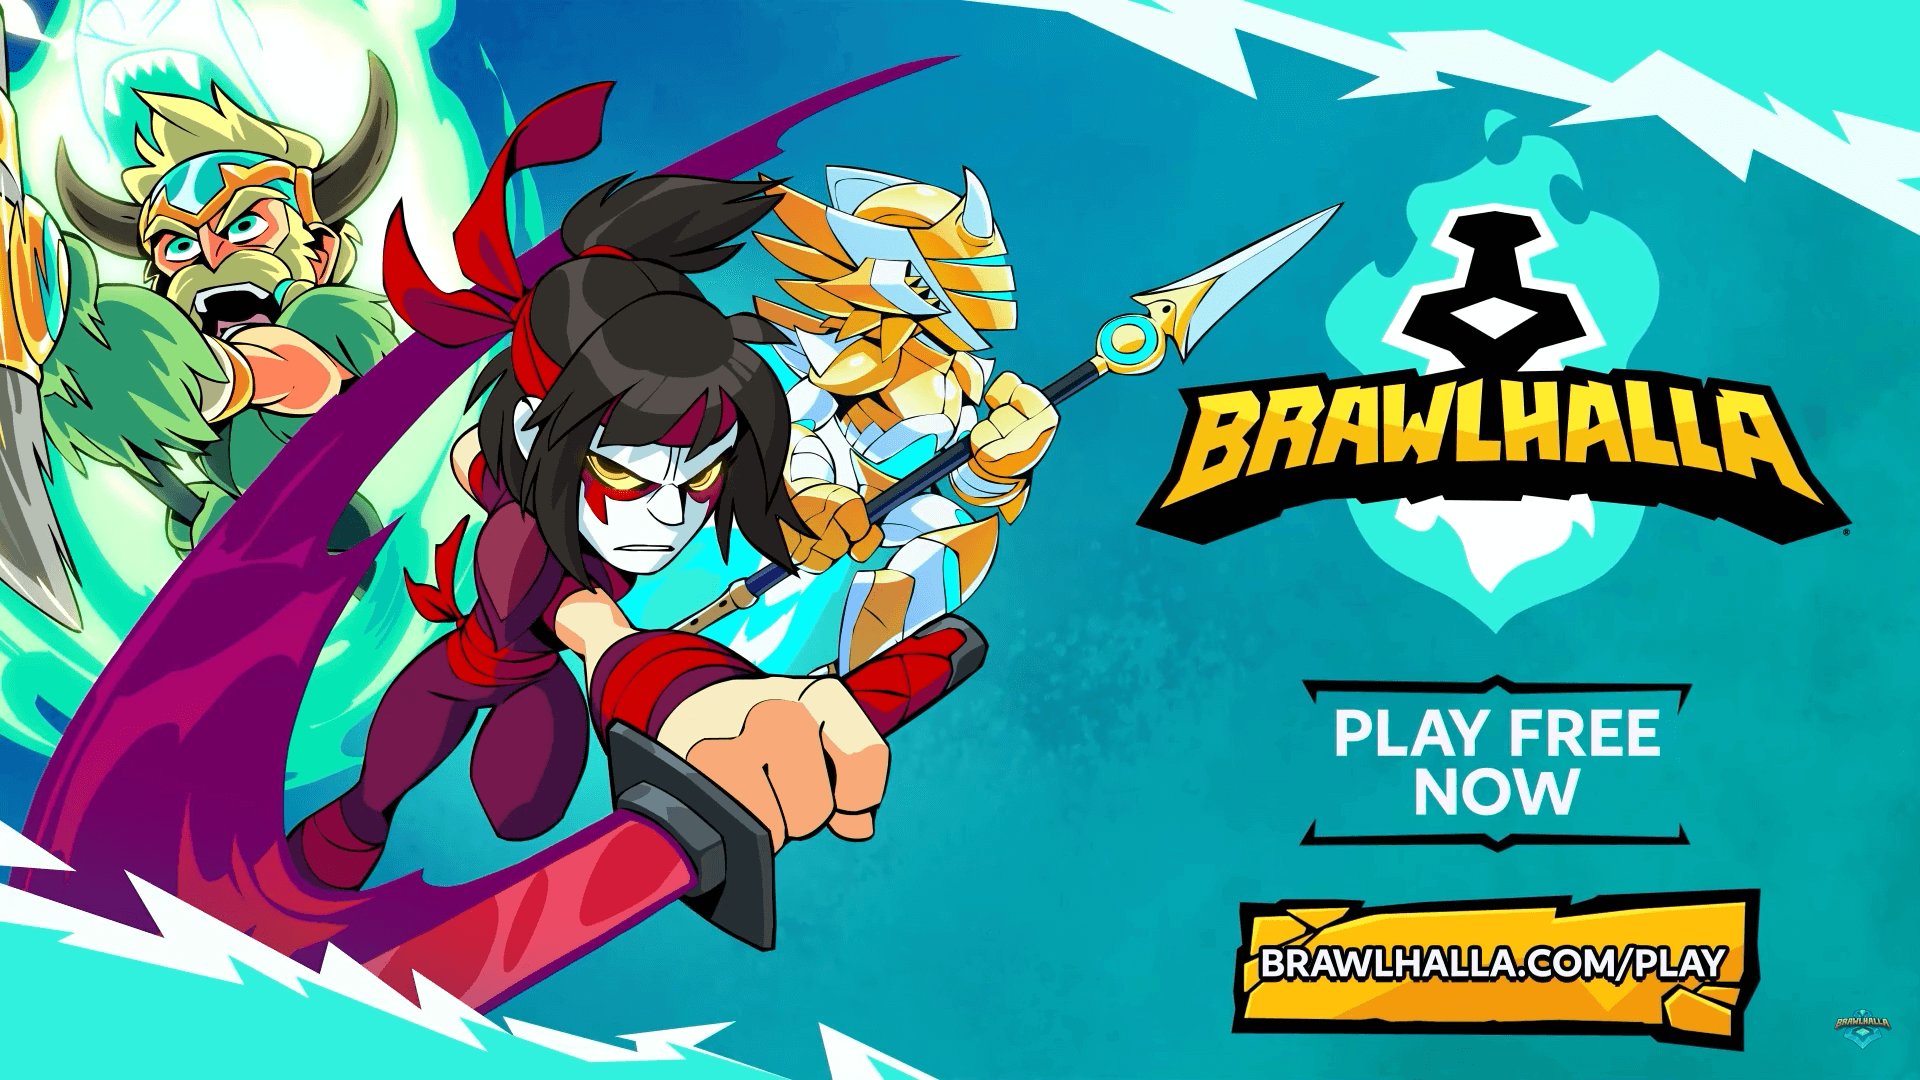 100 Million Players in Brawlhalla. A Special Event is Coming